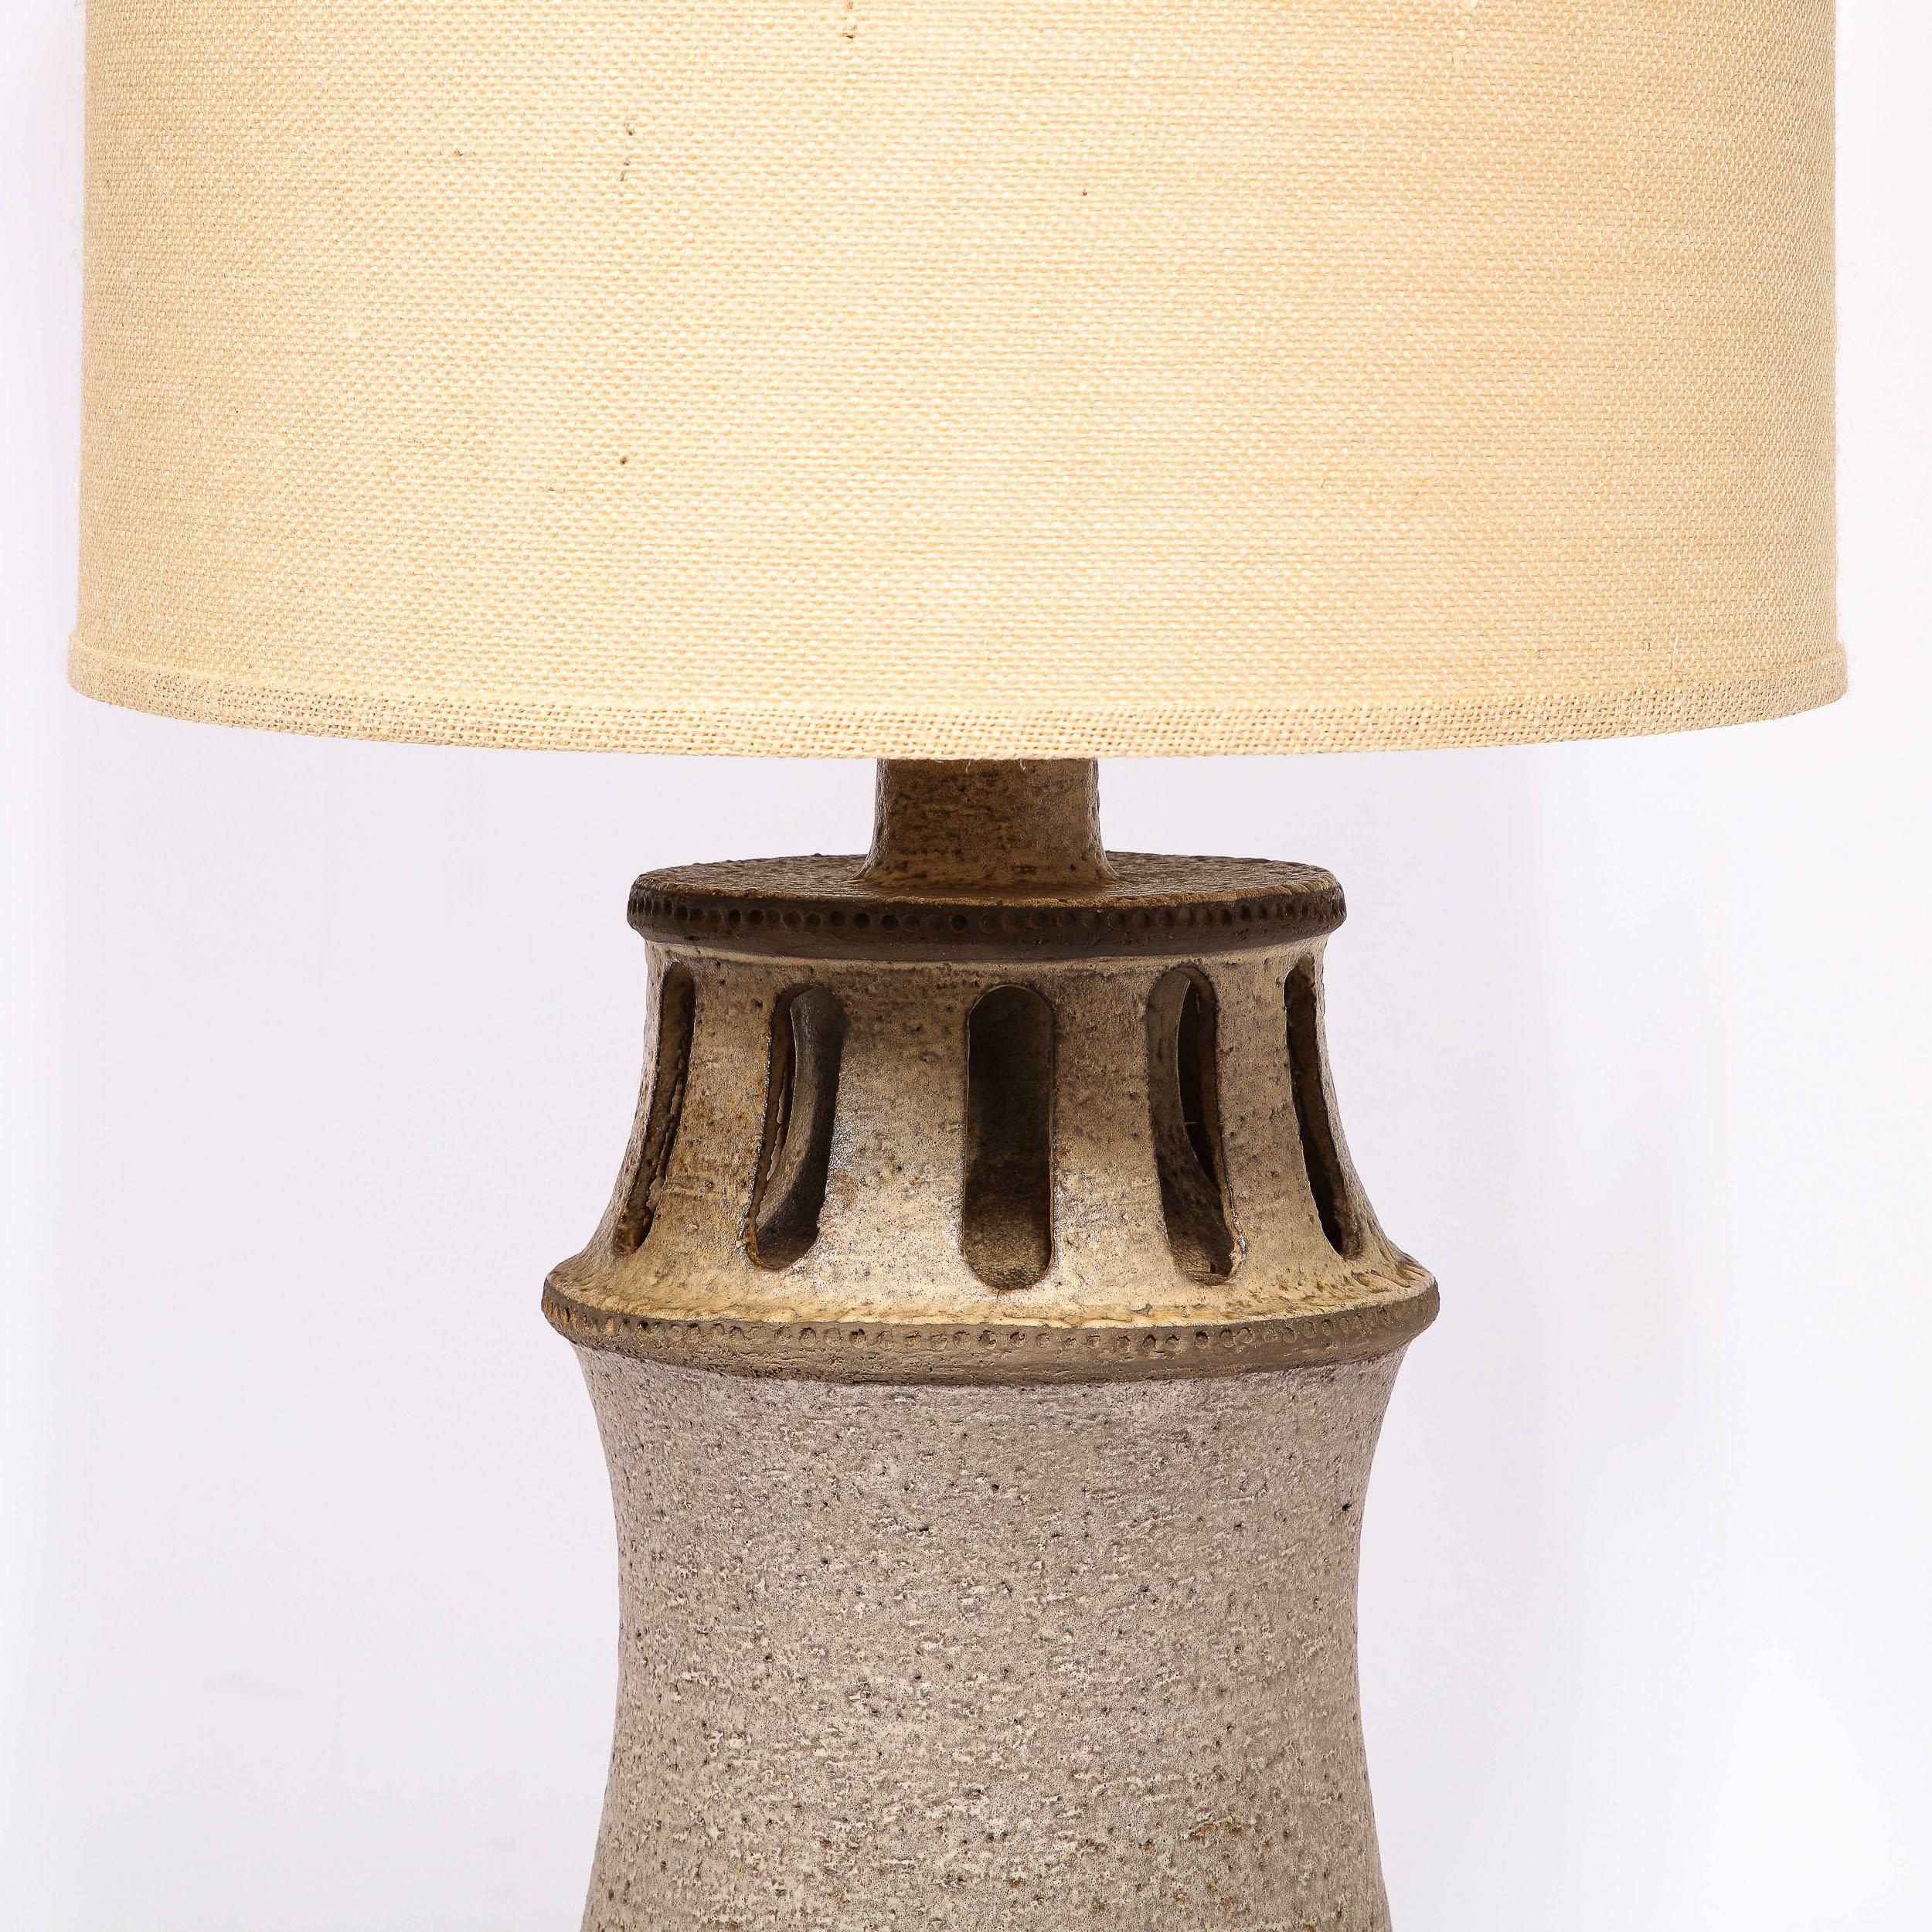 Hand-Crafted Mid-Century Modern Ceramic Table Lamp w/ Arcade Detailing and Raw Fiber Shade For Sale